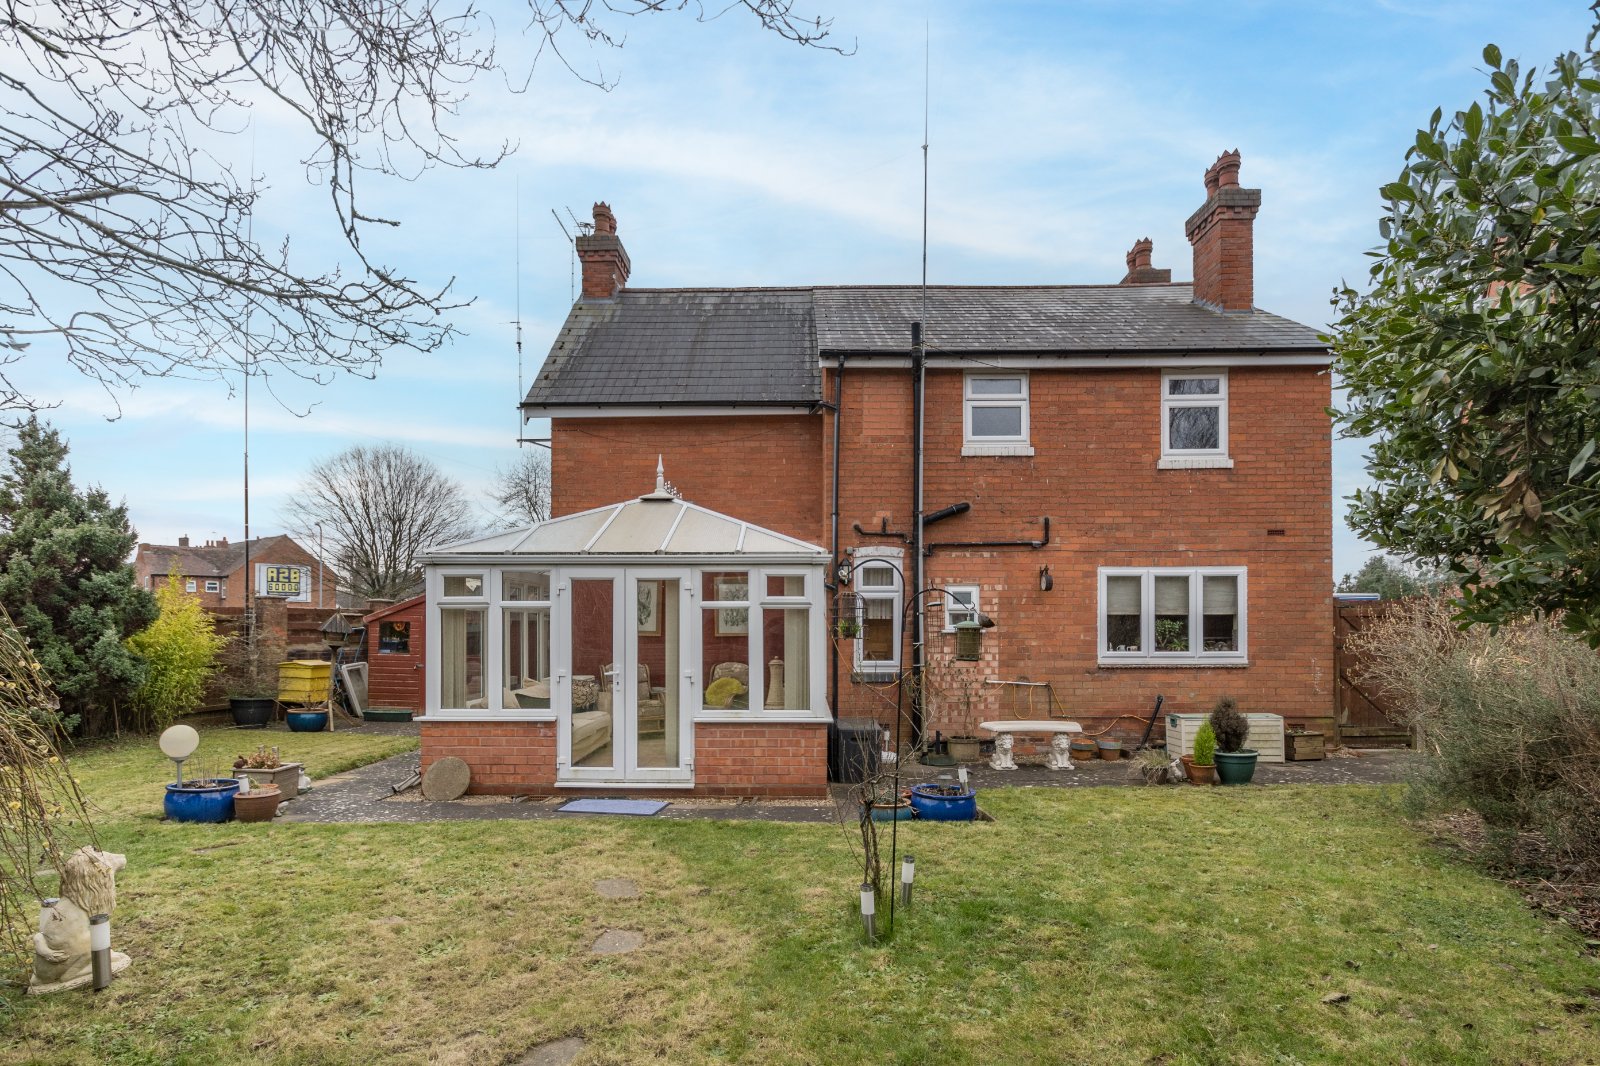 3 bed house for sale in Rectory Road, Headless Cross - Property Image 1